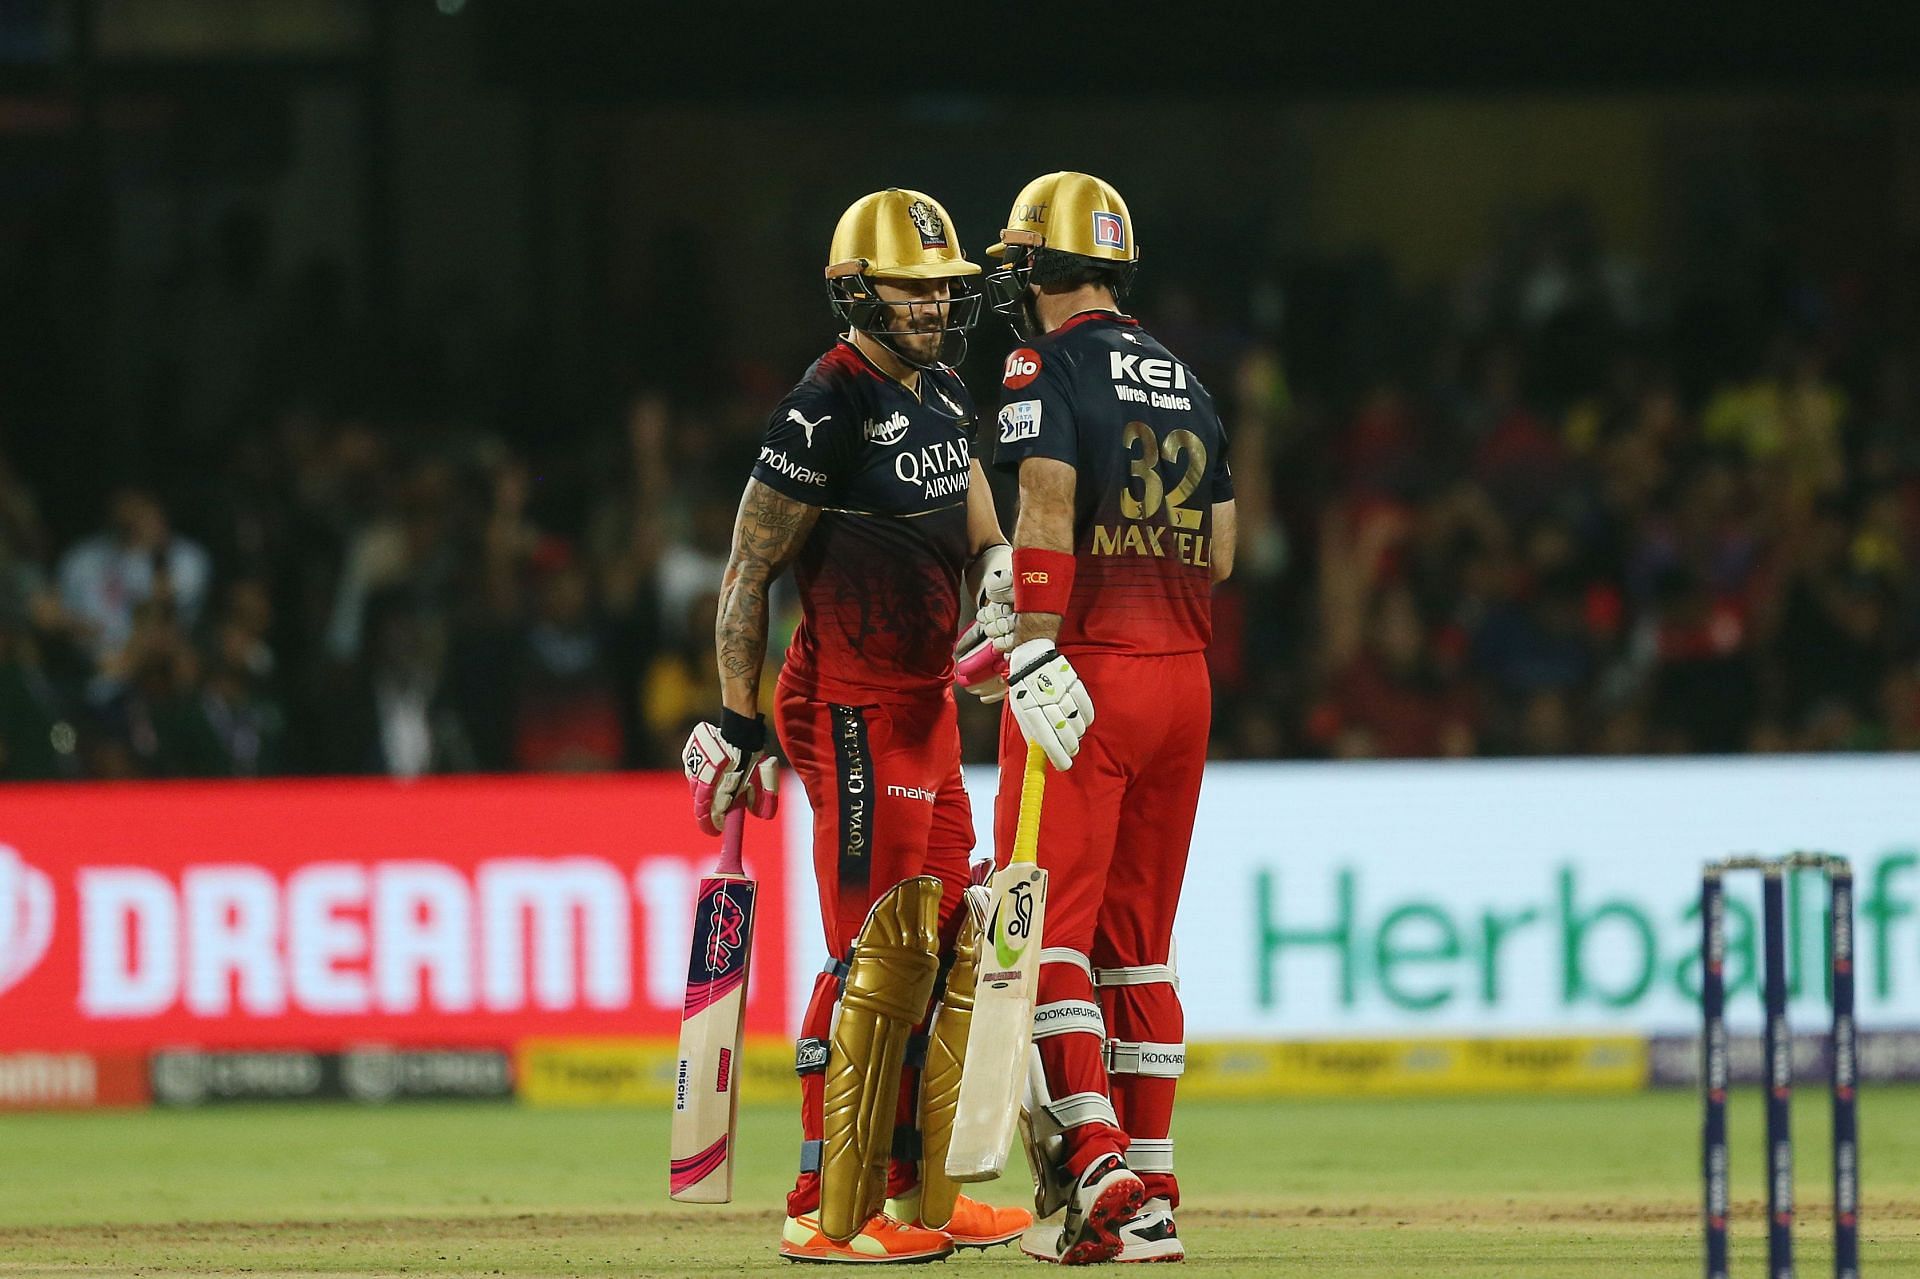 Faf du Plessis and Glenn Maxwell in action (Image Courtesy: Twitter/IPL)